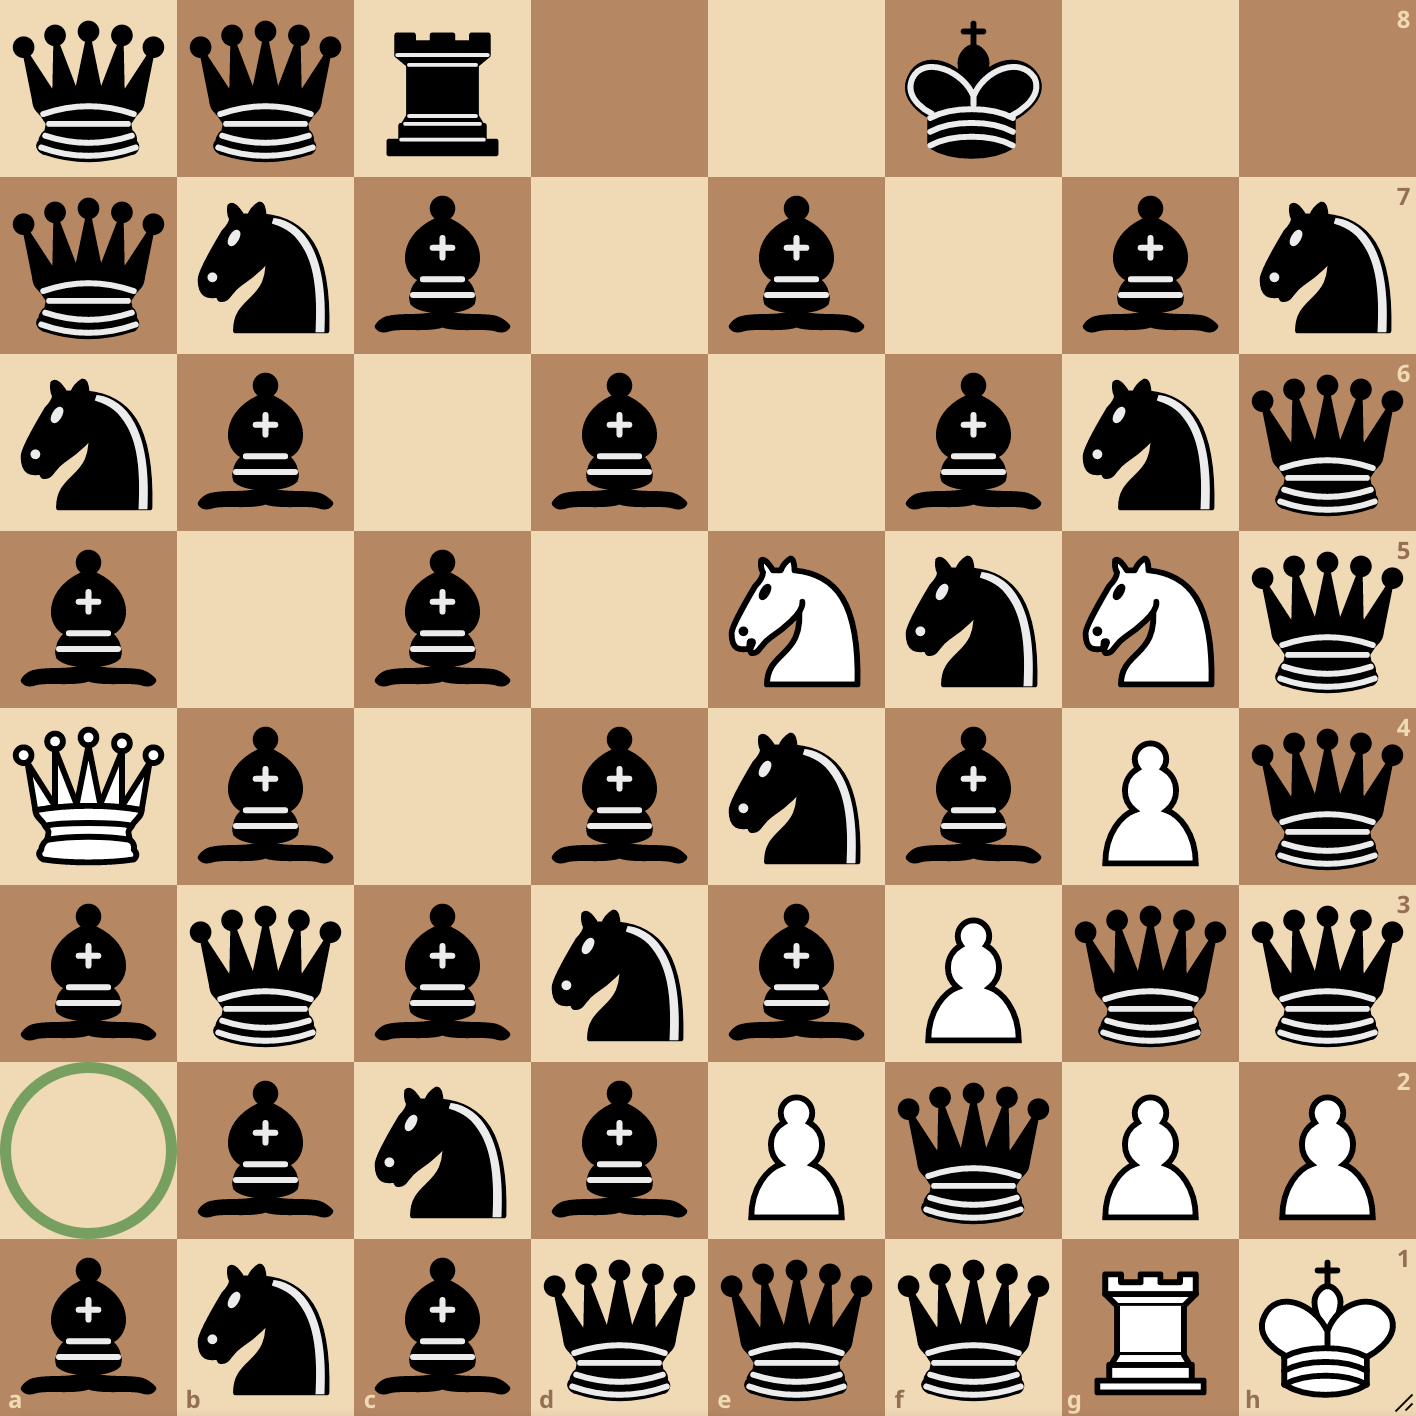 A chess board with a1 at the bottom left. A green circle marks a2. The board's FEN is below.